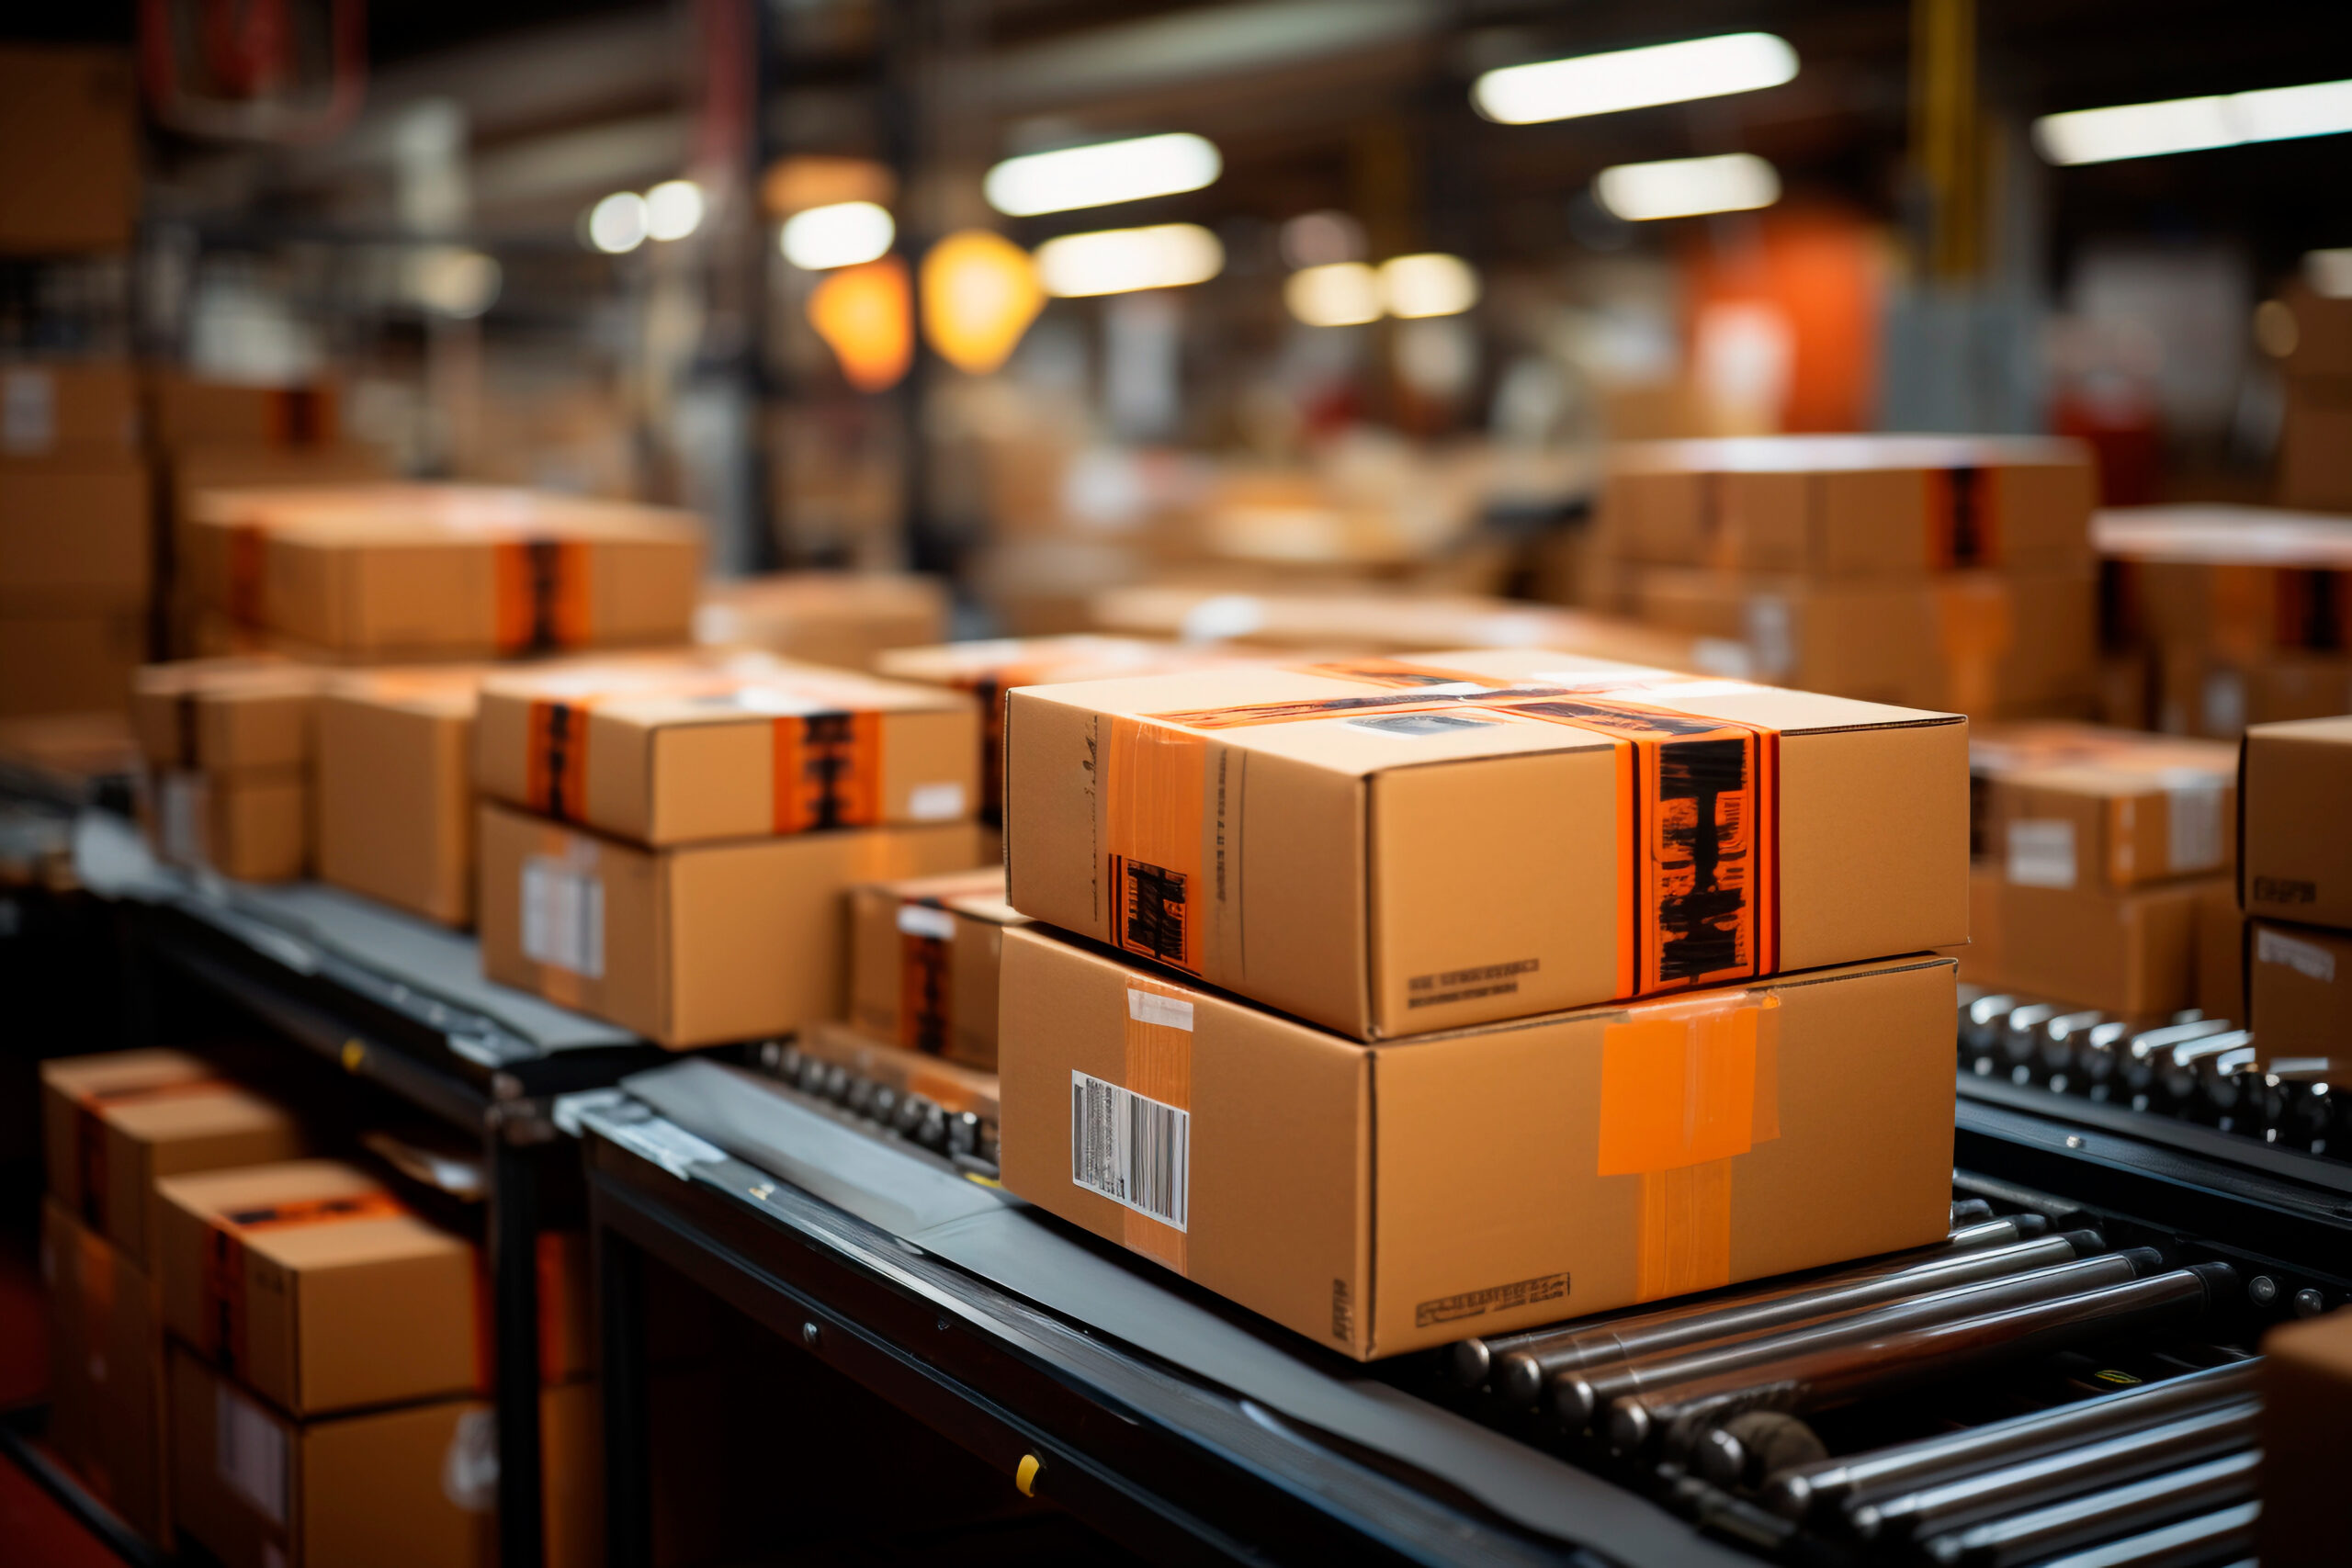 Parcels and boxes on the distribution production line in the logistics center delivery service. Distribution warehouse. E-commerce, storage, delivery and packaging service concept